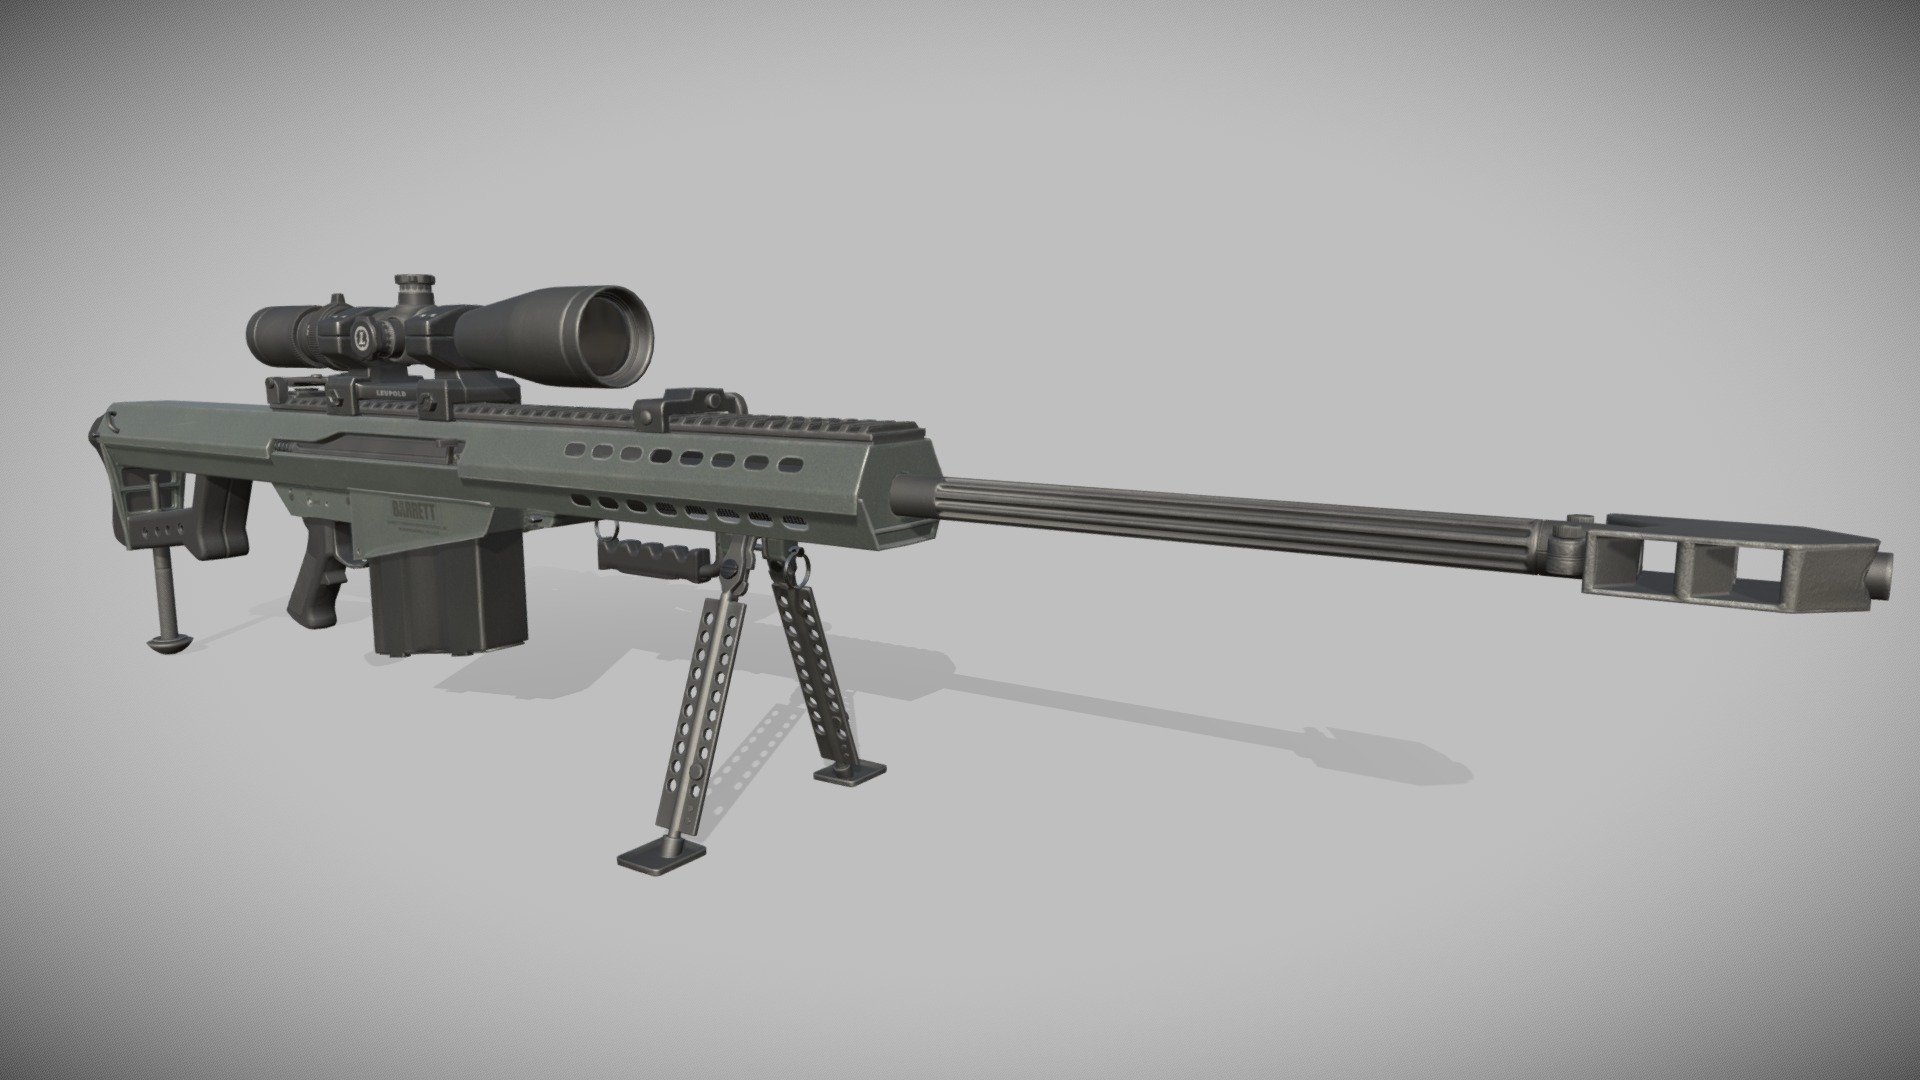 Mid poly mesh. 

Modeled, rigged and animated in Blender. Some armature bones have constrains with just the movement they should do. 

4K PBR textures textured in Substance Painter.

You can see renders here: https://govi-48.artstation.com/projects/Jv3Wad - Sniper Rifle - Barrett M82A1 - Buy Royalty Free 3D model by GoVi (@GoVi-48) 3d model